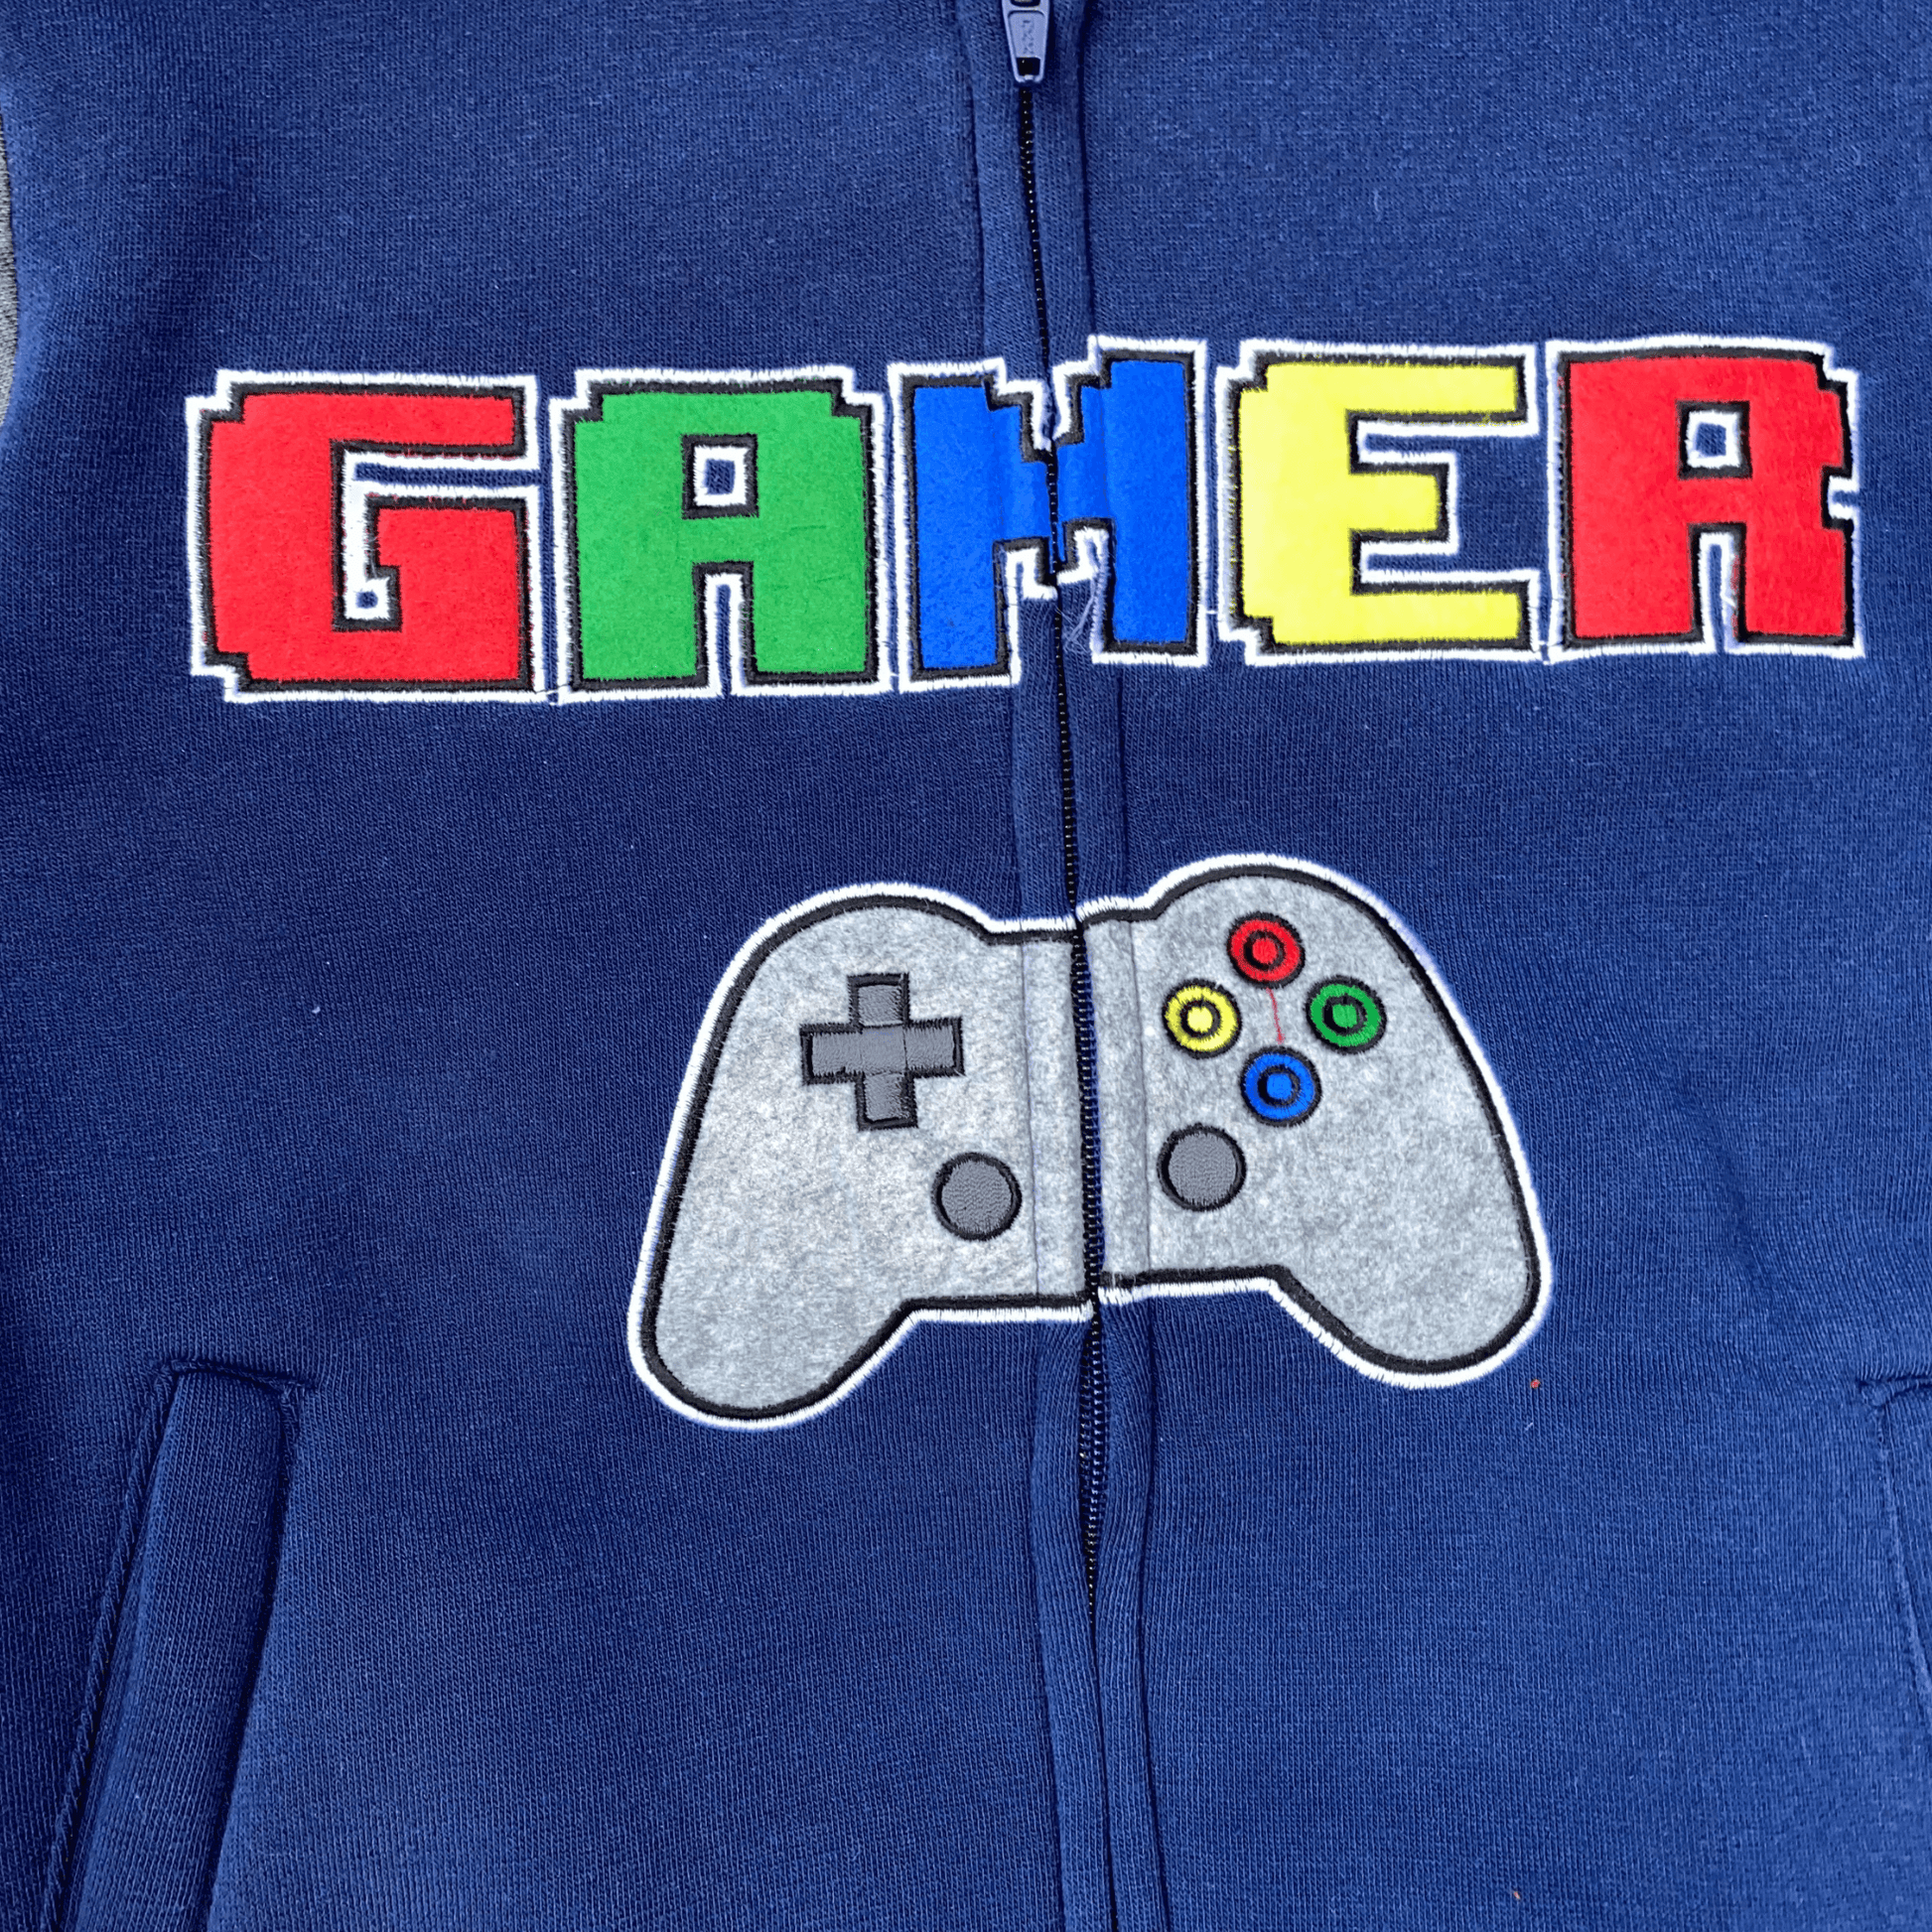 Fun gamer fleece set with hoodie. This colorful and fun set features "Gamer" and a picture of a controller embroidered on the front. It also has embroidered arms with "Push" and "Start". This is a great set for all of the little gamers out there.  This set features a zipper front hoodie and elastic around the ankles. 